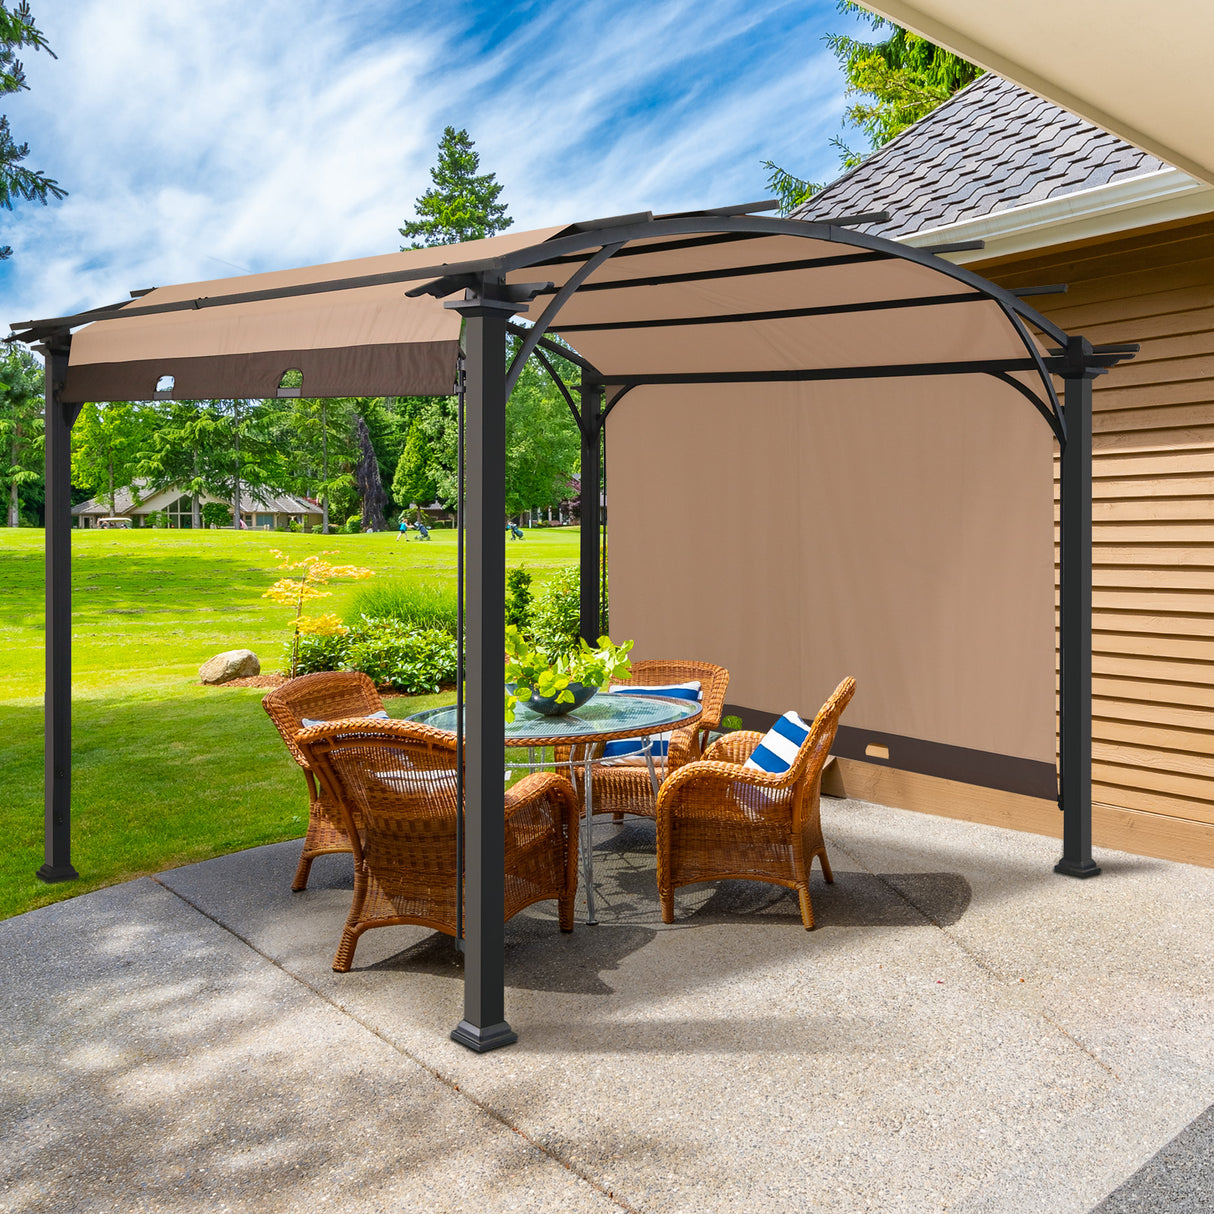 EAGLE PEAK Steel Arched Outdoor Pergola 11.4 x 11.4 ft. with Retractable and Adjustable Shade Canopy, Metal Frame Patio Sun Shelter, Beige